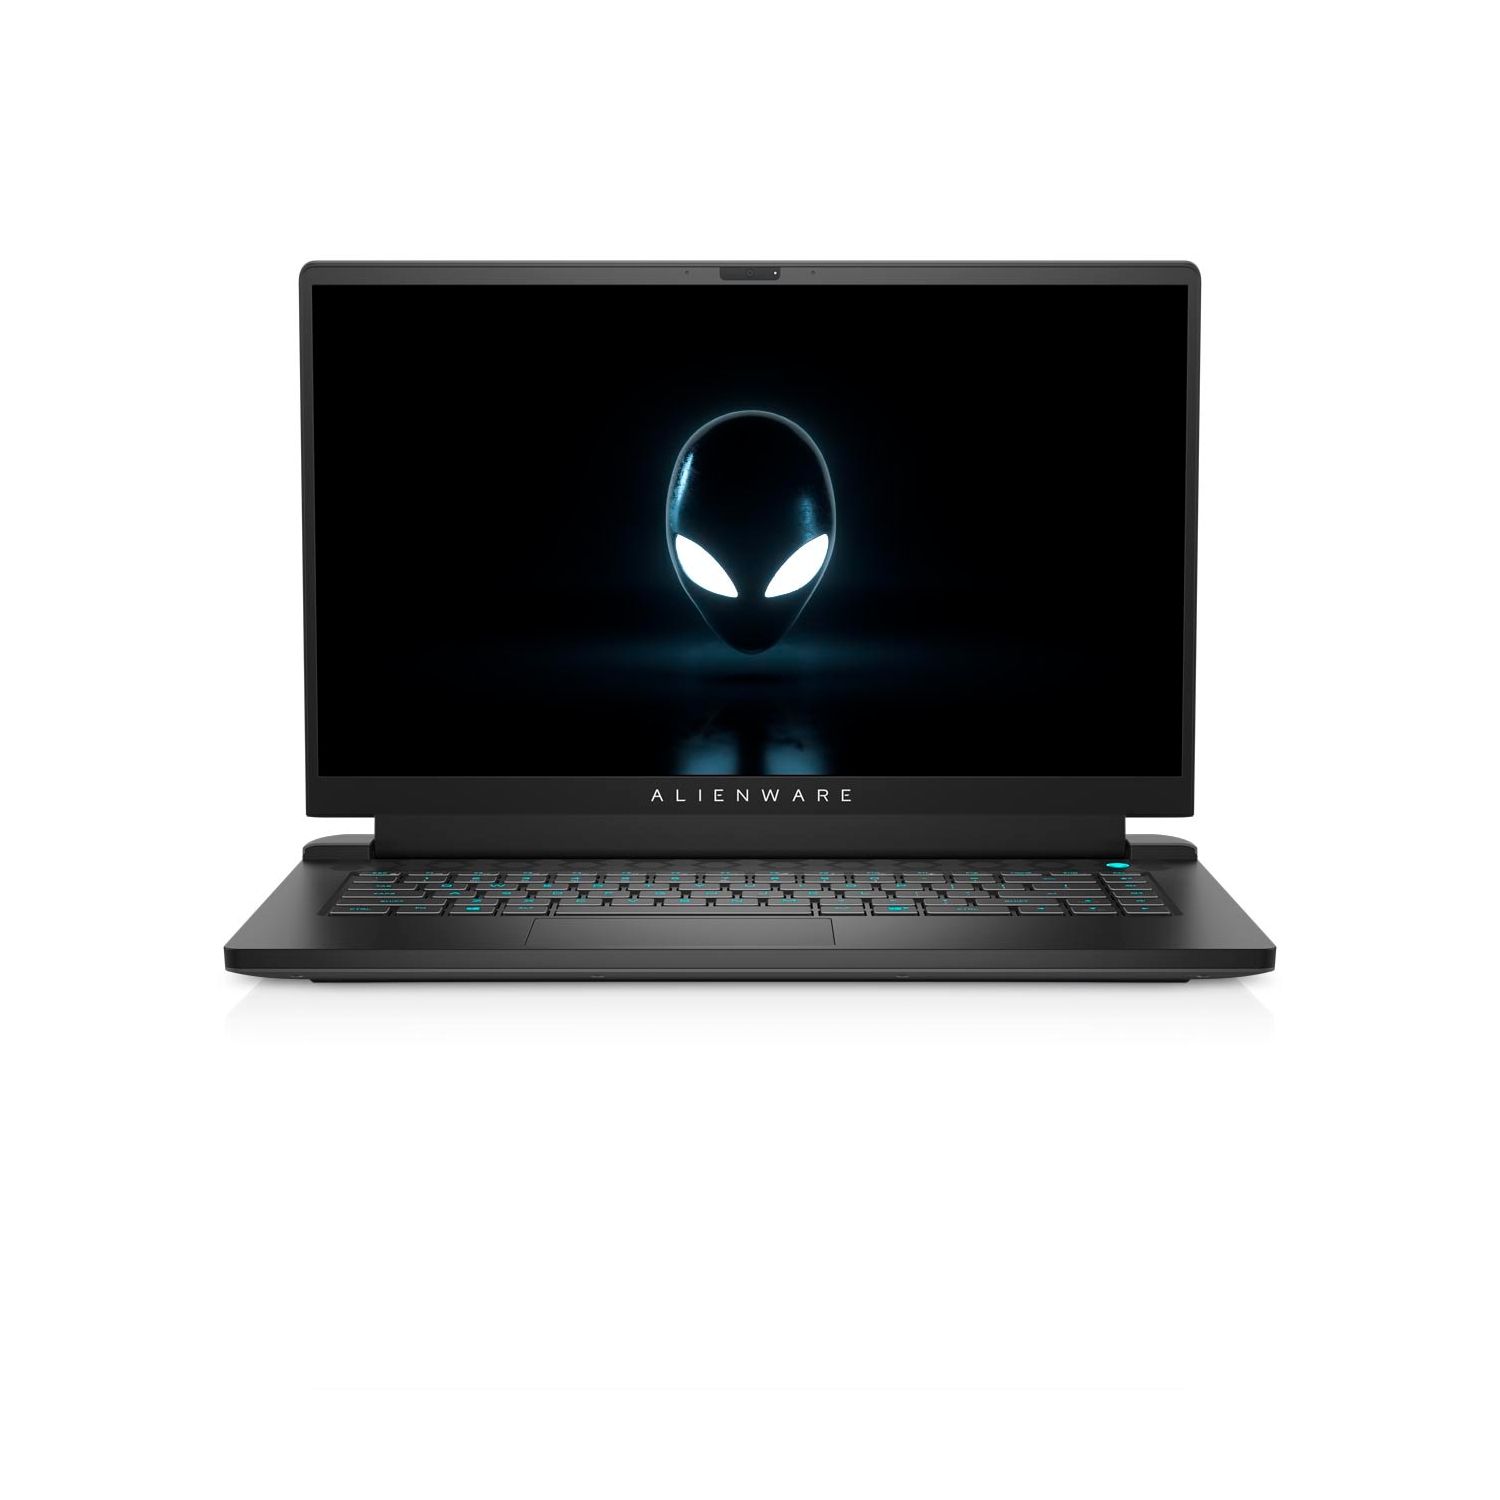 Refurbished (Excellent) - Dell Alienware m15 R5 Ryzen Edition Gaming Laptop (2021), 15.6" QHD, Core Ryzen 7, 1TB SSD, 16GB RAM, RTX 3070, 8 Cores @ 4.4 GHz Certified